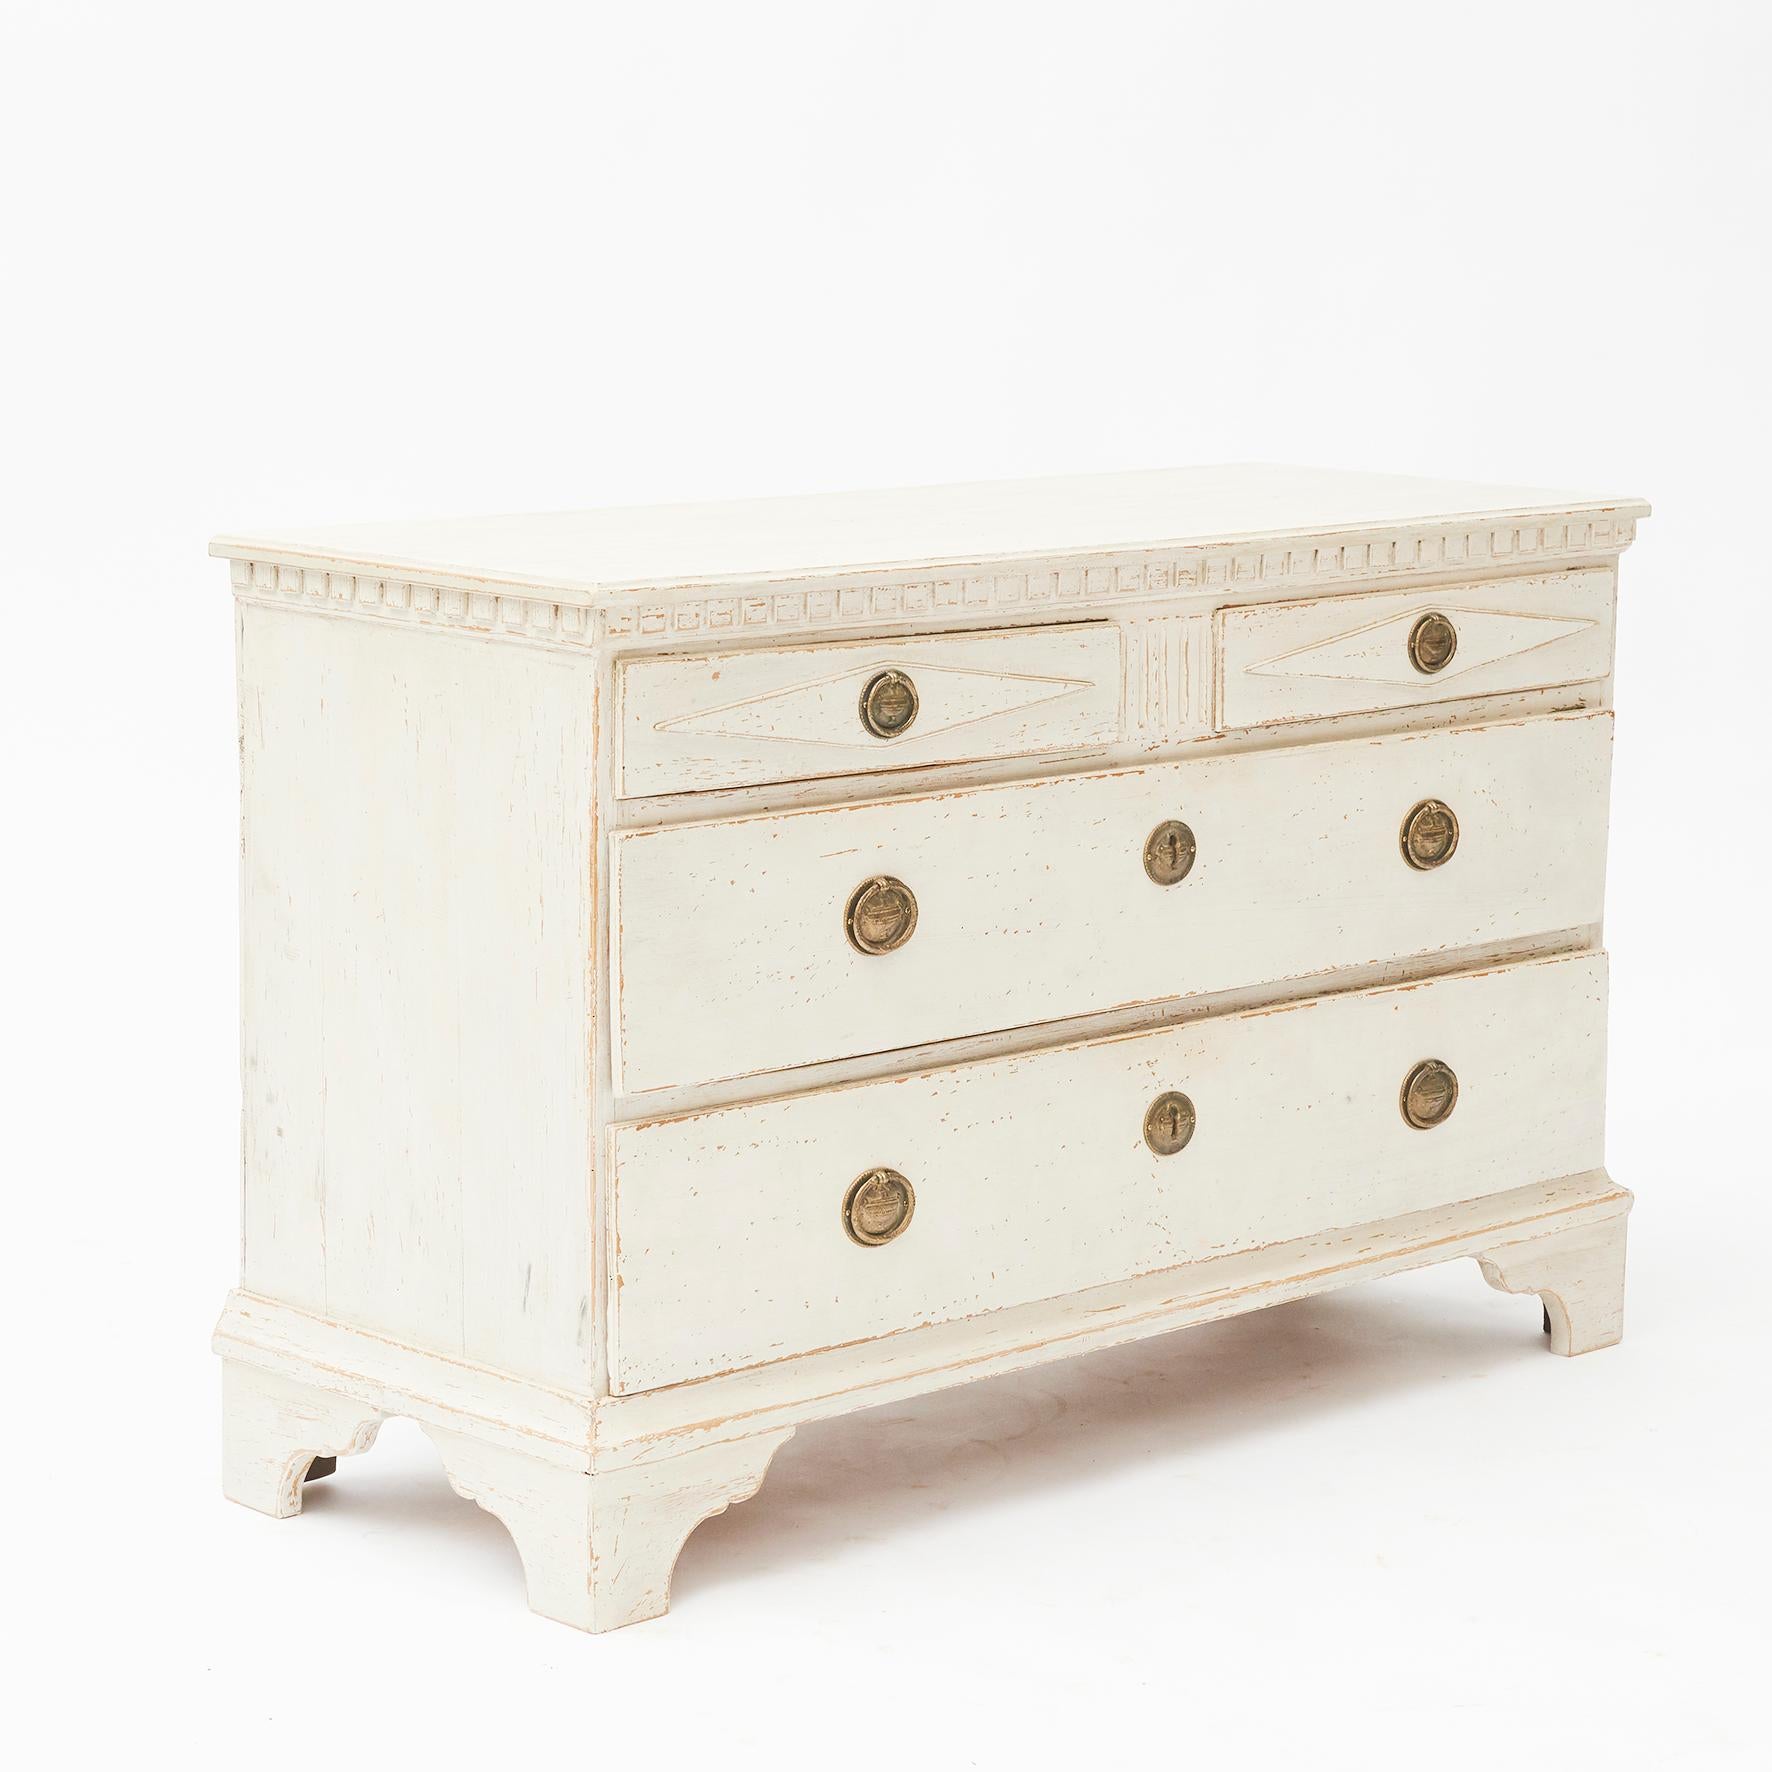 Painted Early 19th Century Danish Empire Chest of Drawers